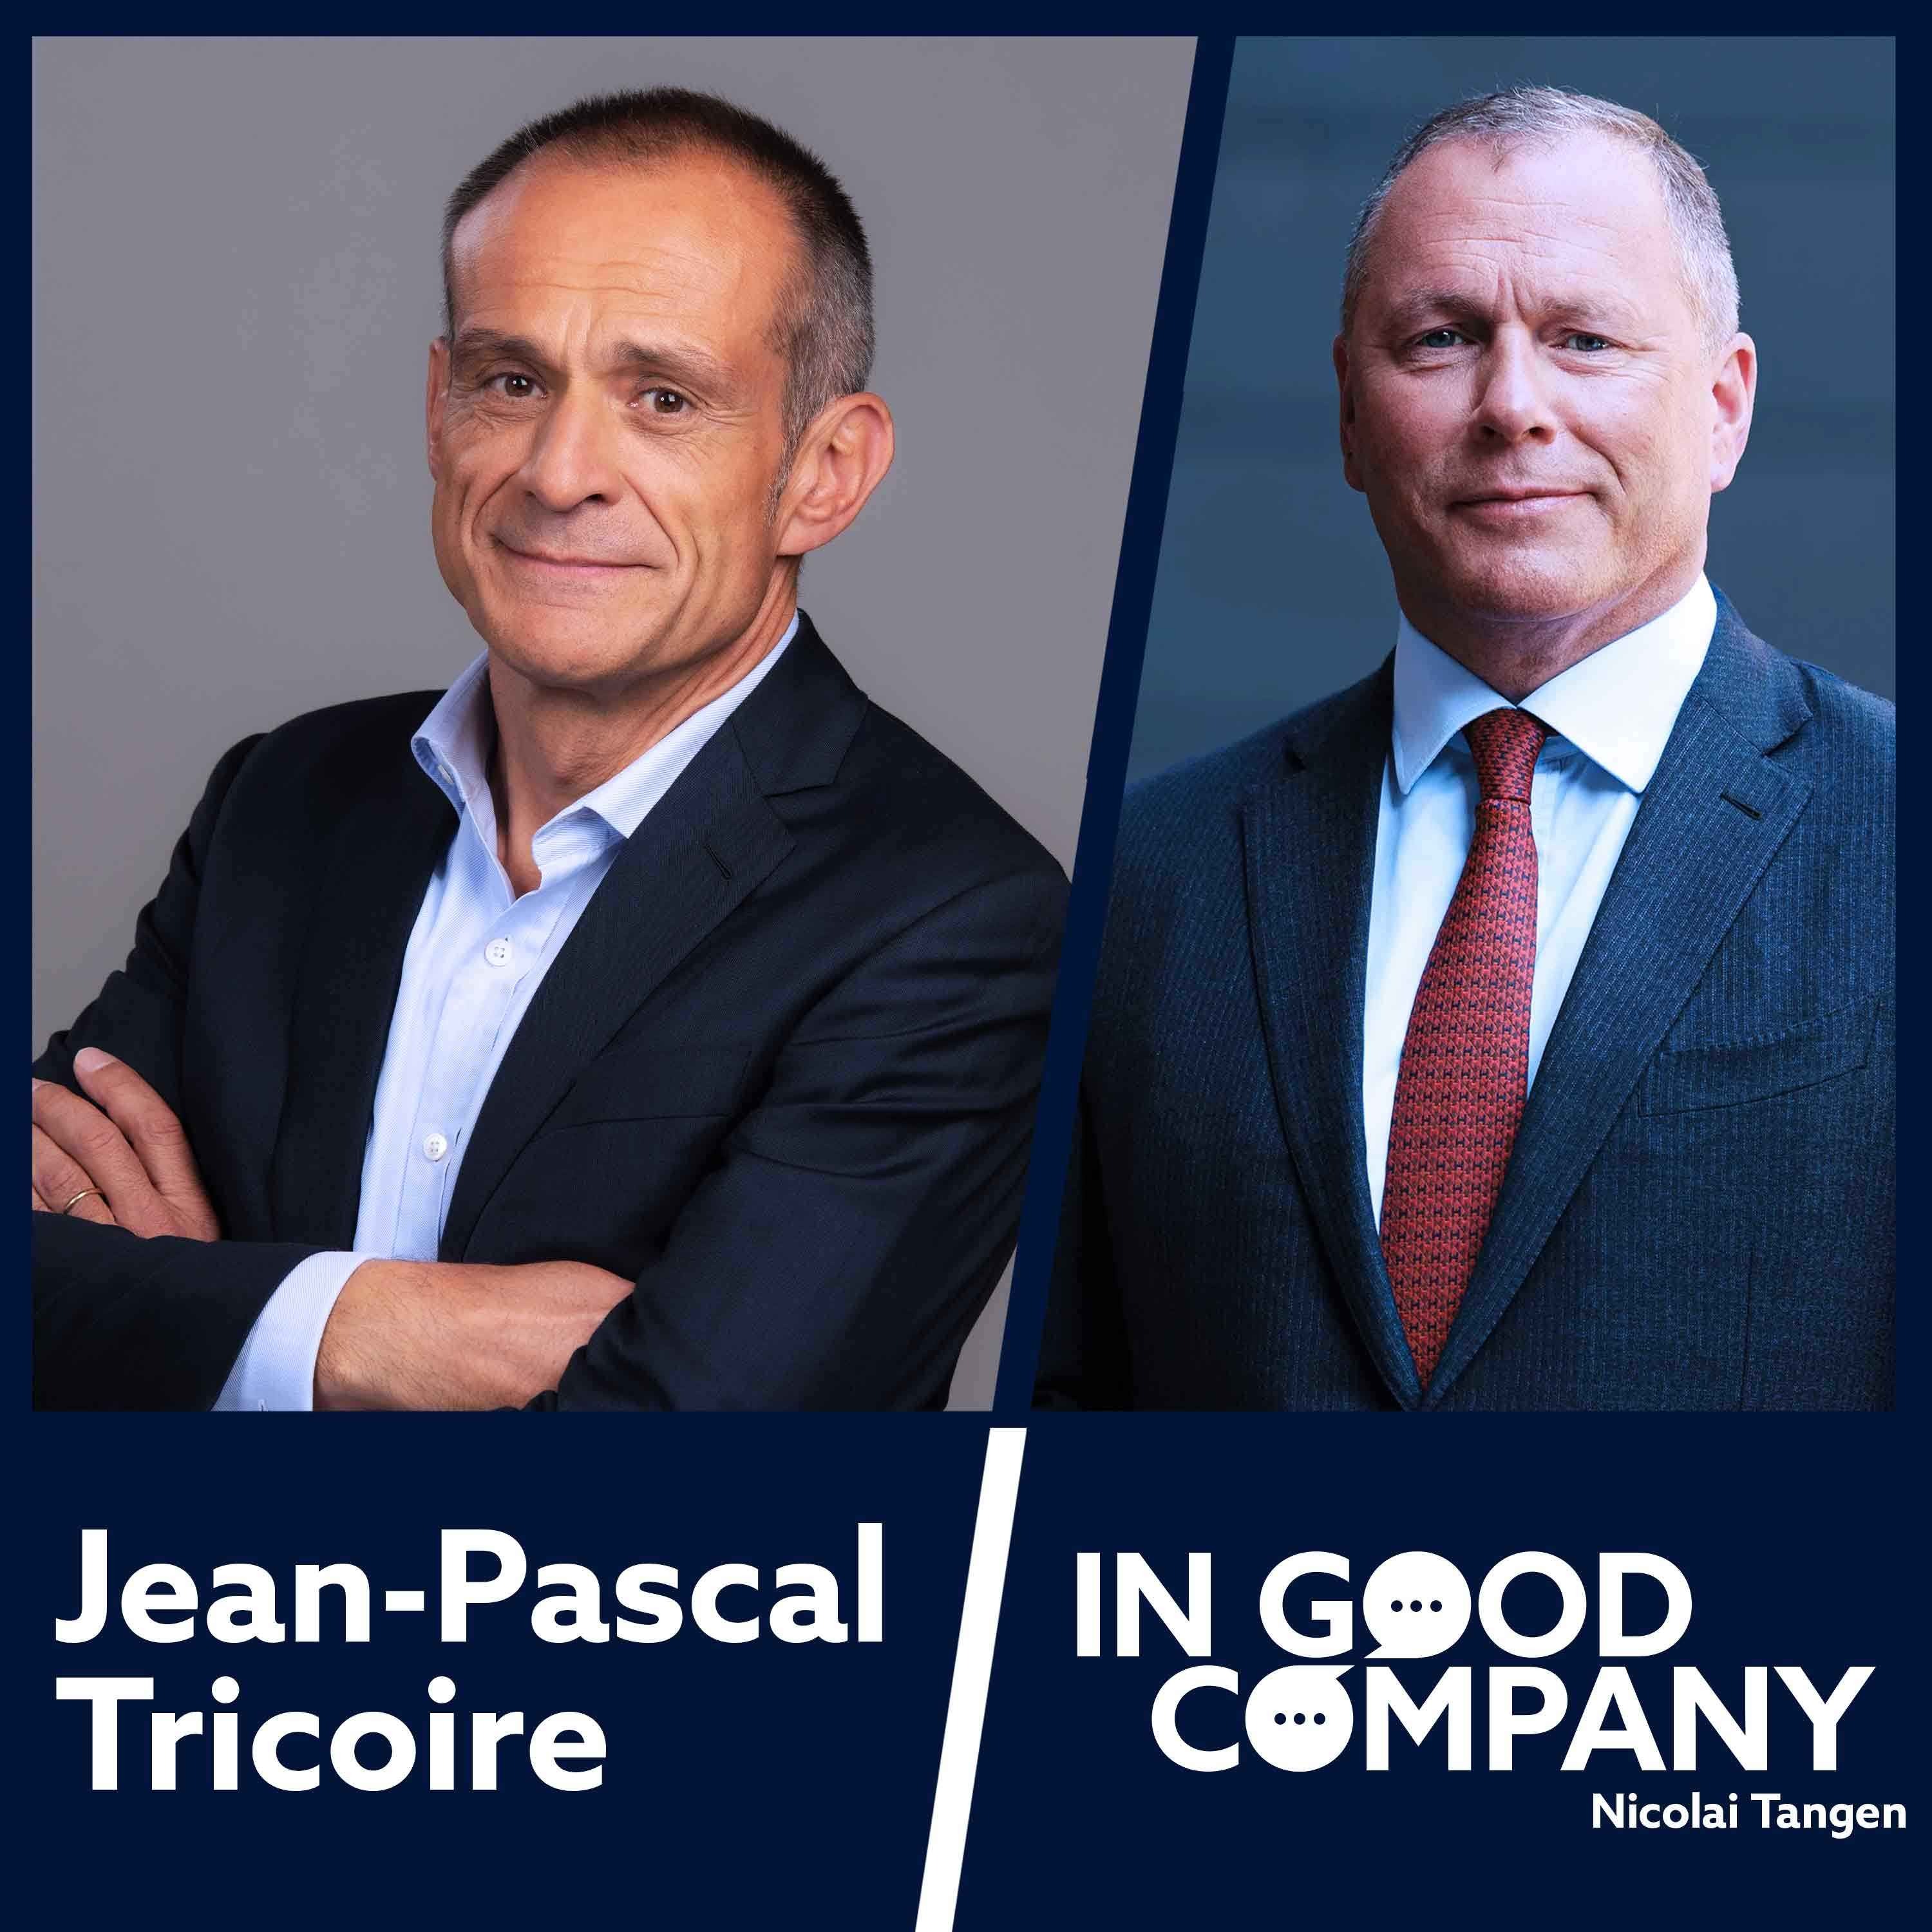 Jean-Pascal Tricoire CEO and Chairman of Schneider Electric by Norges Bank Investment Management